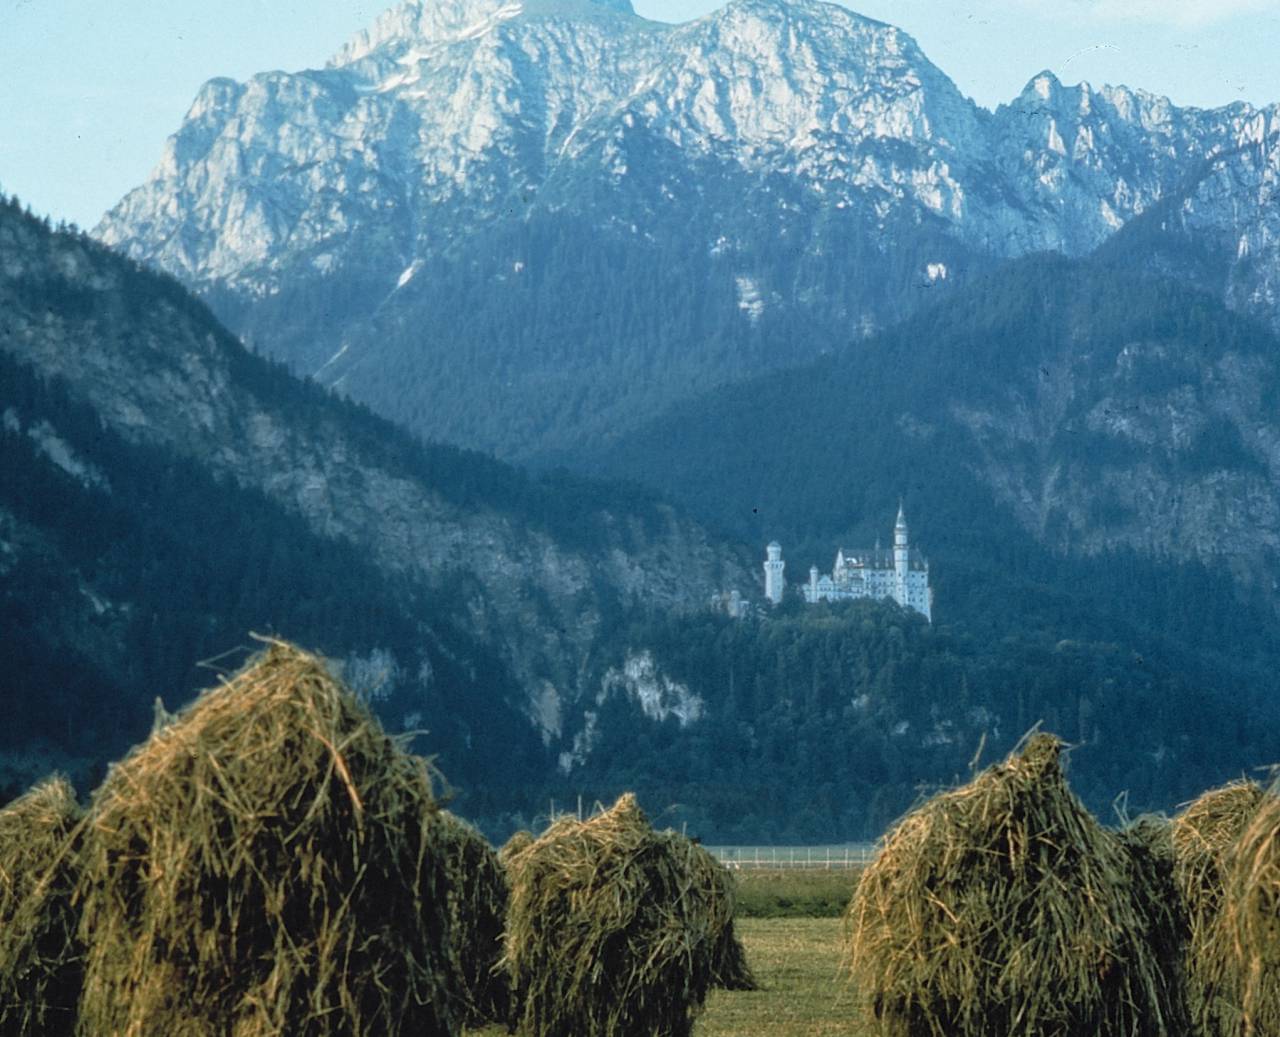 Neuschwanstein Castle on a hill in the forest in the mountains